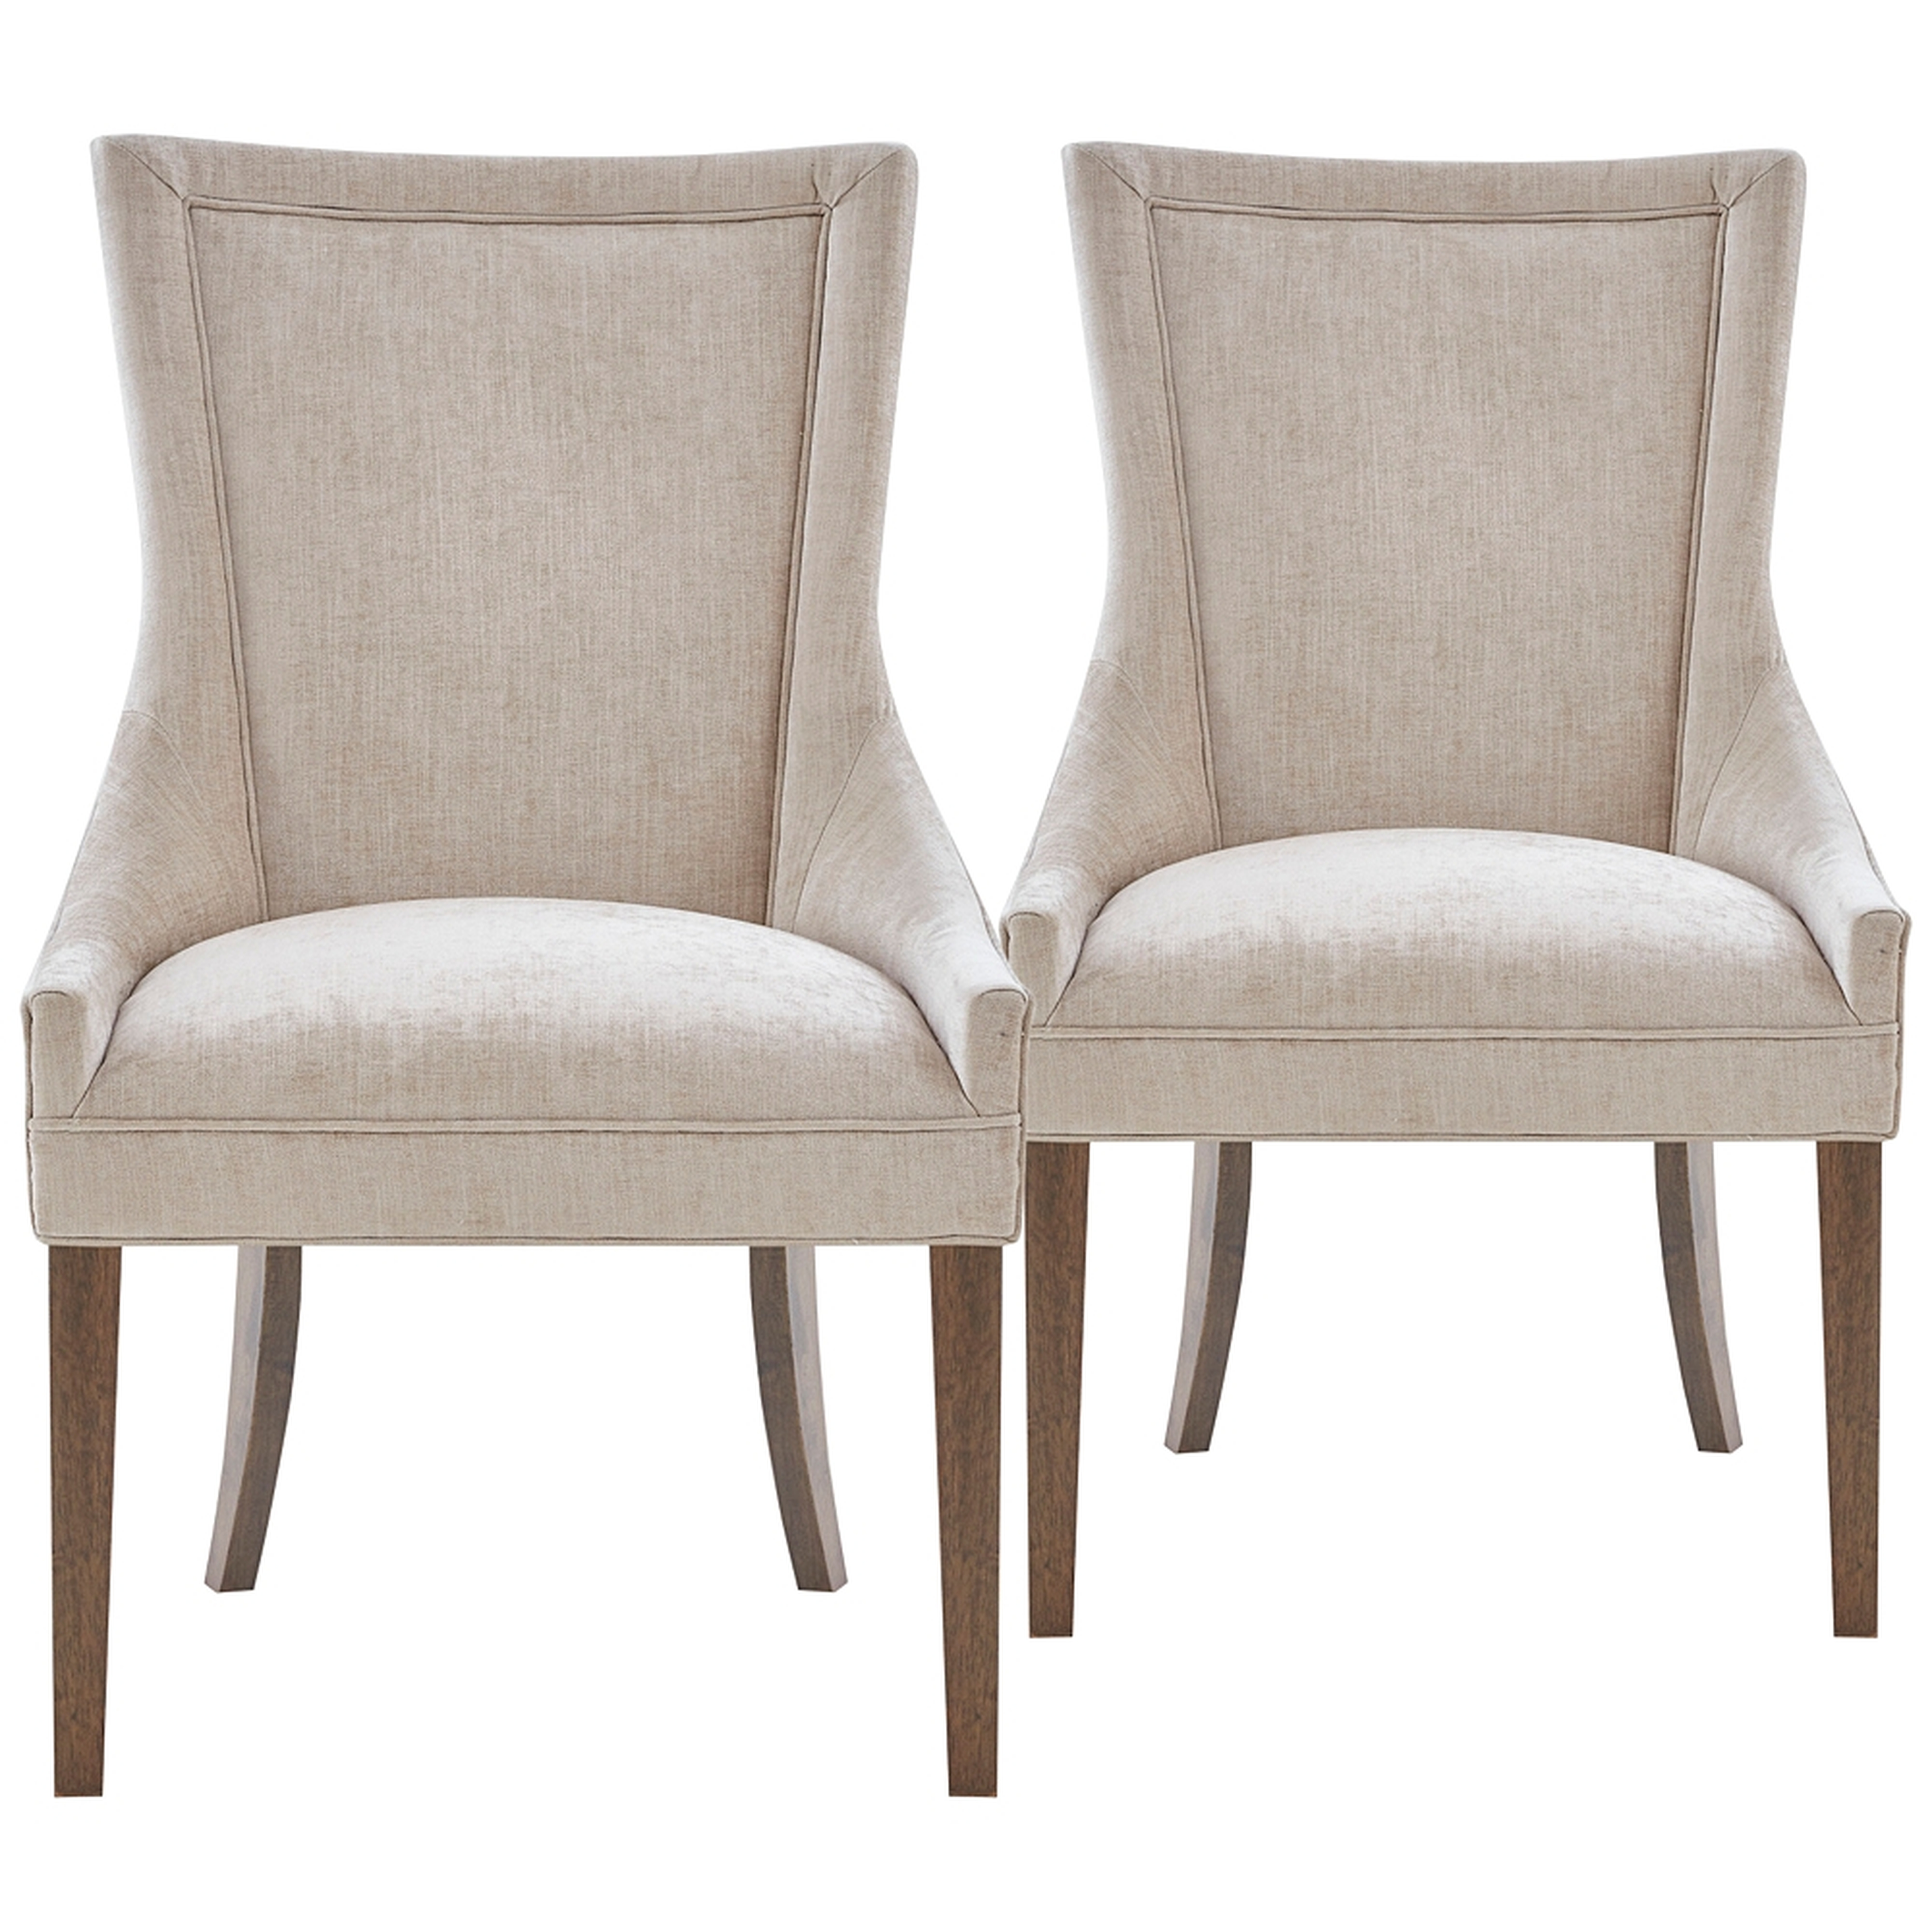 Ultra Cream Chenille Dining Side Chairs Set of 2 - Style # 766P0 - Lamps Plus